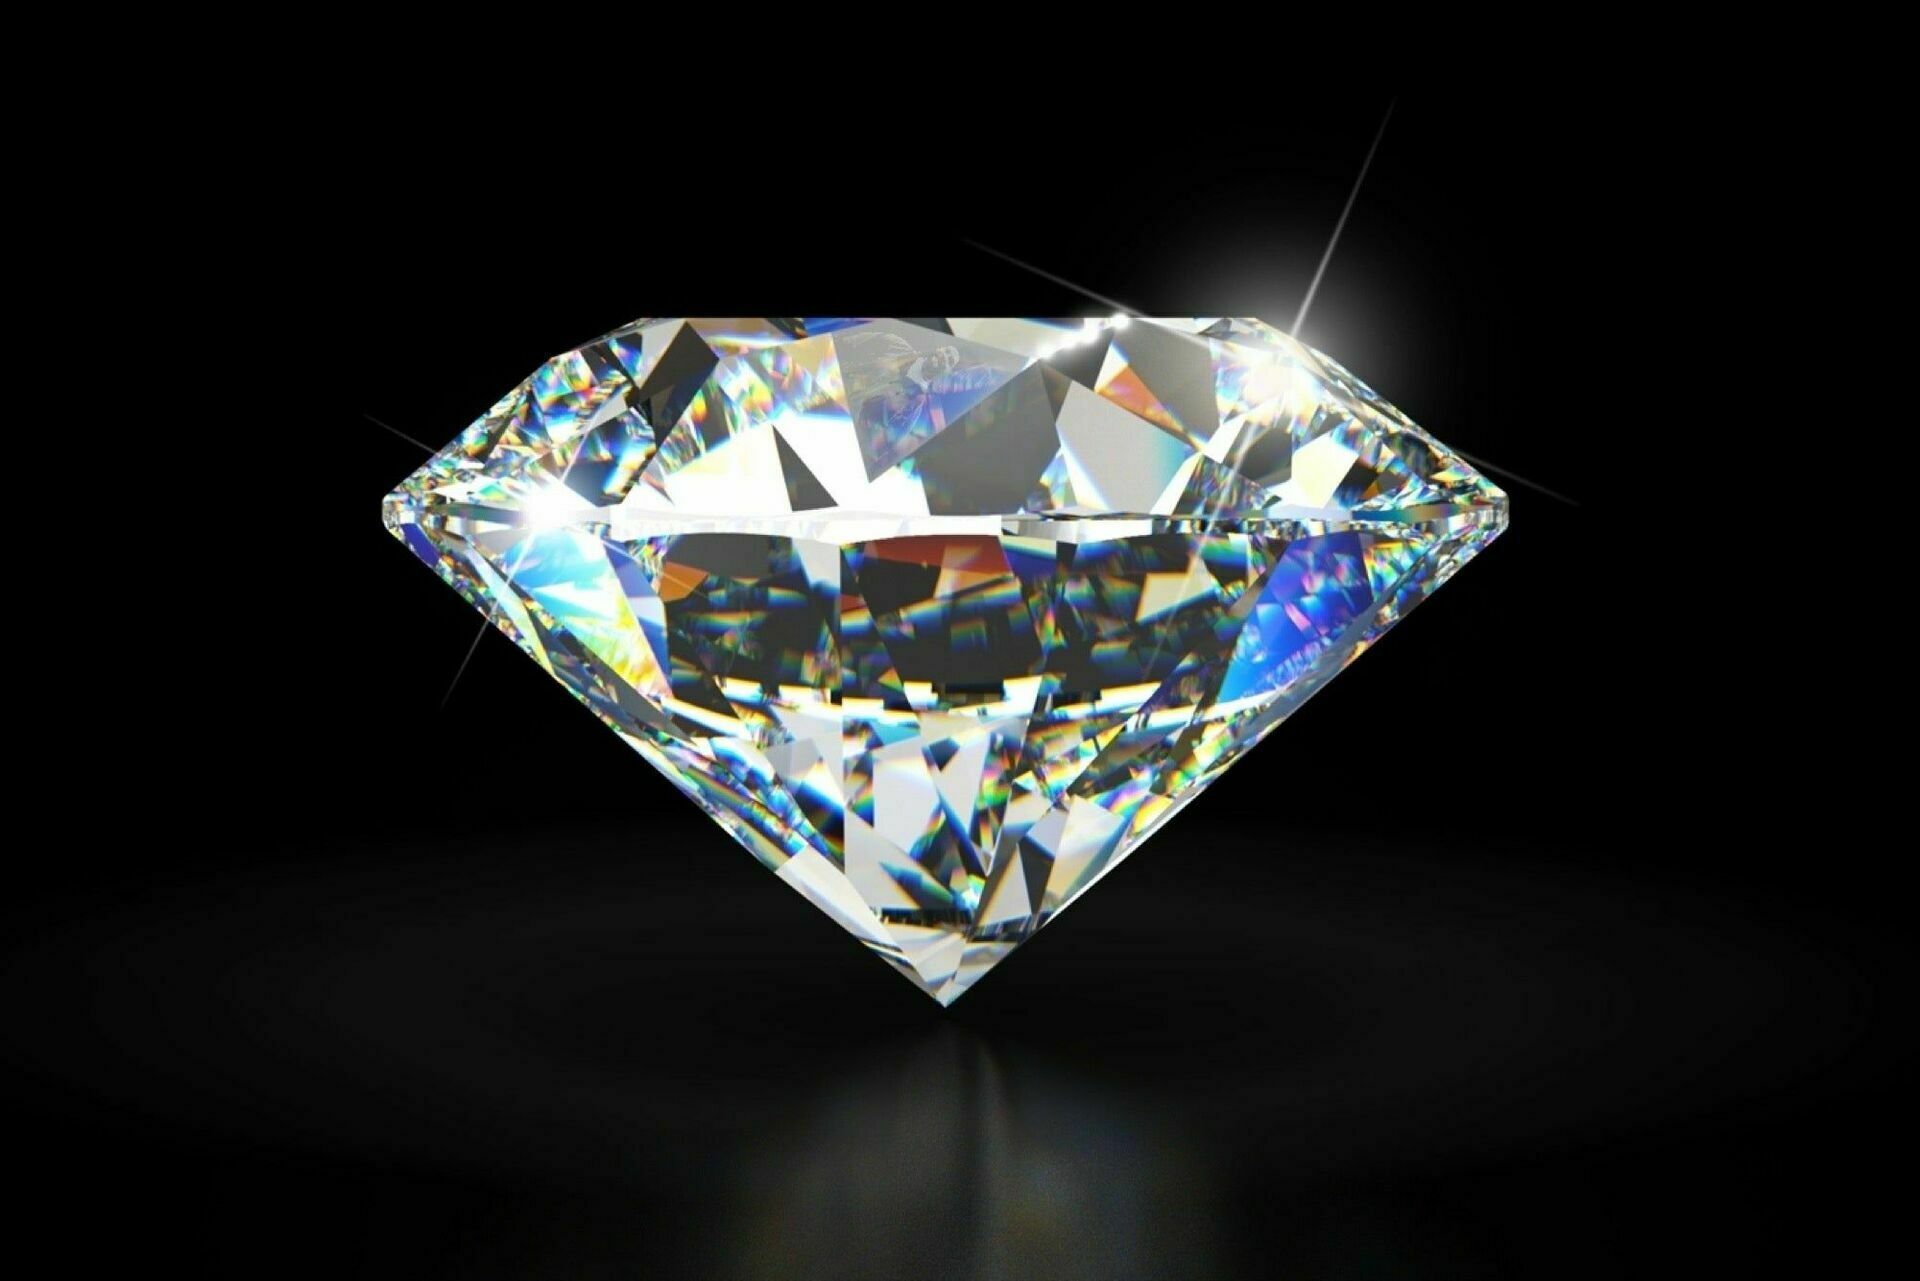 Life after life: the most valuable diamonds formed from the remains of living beings